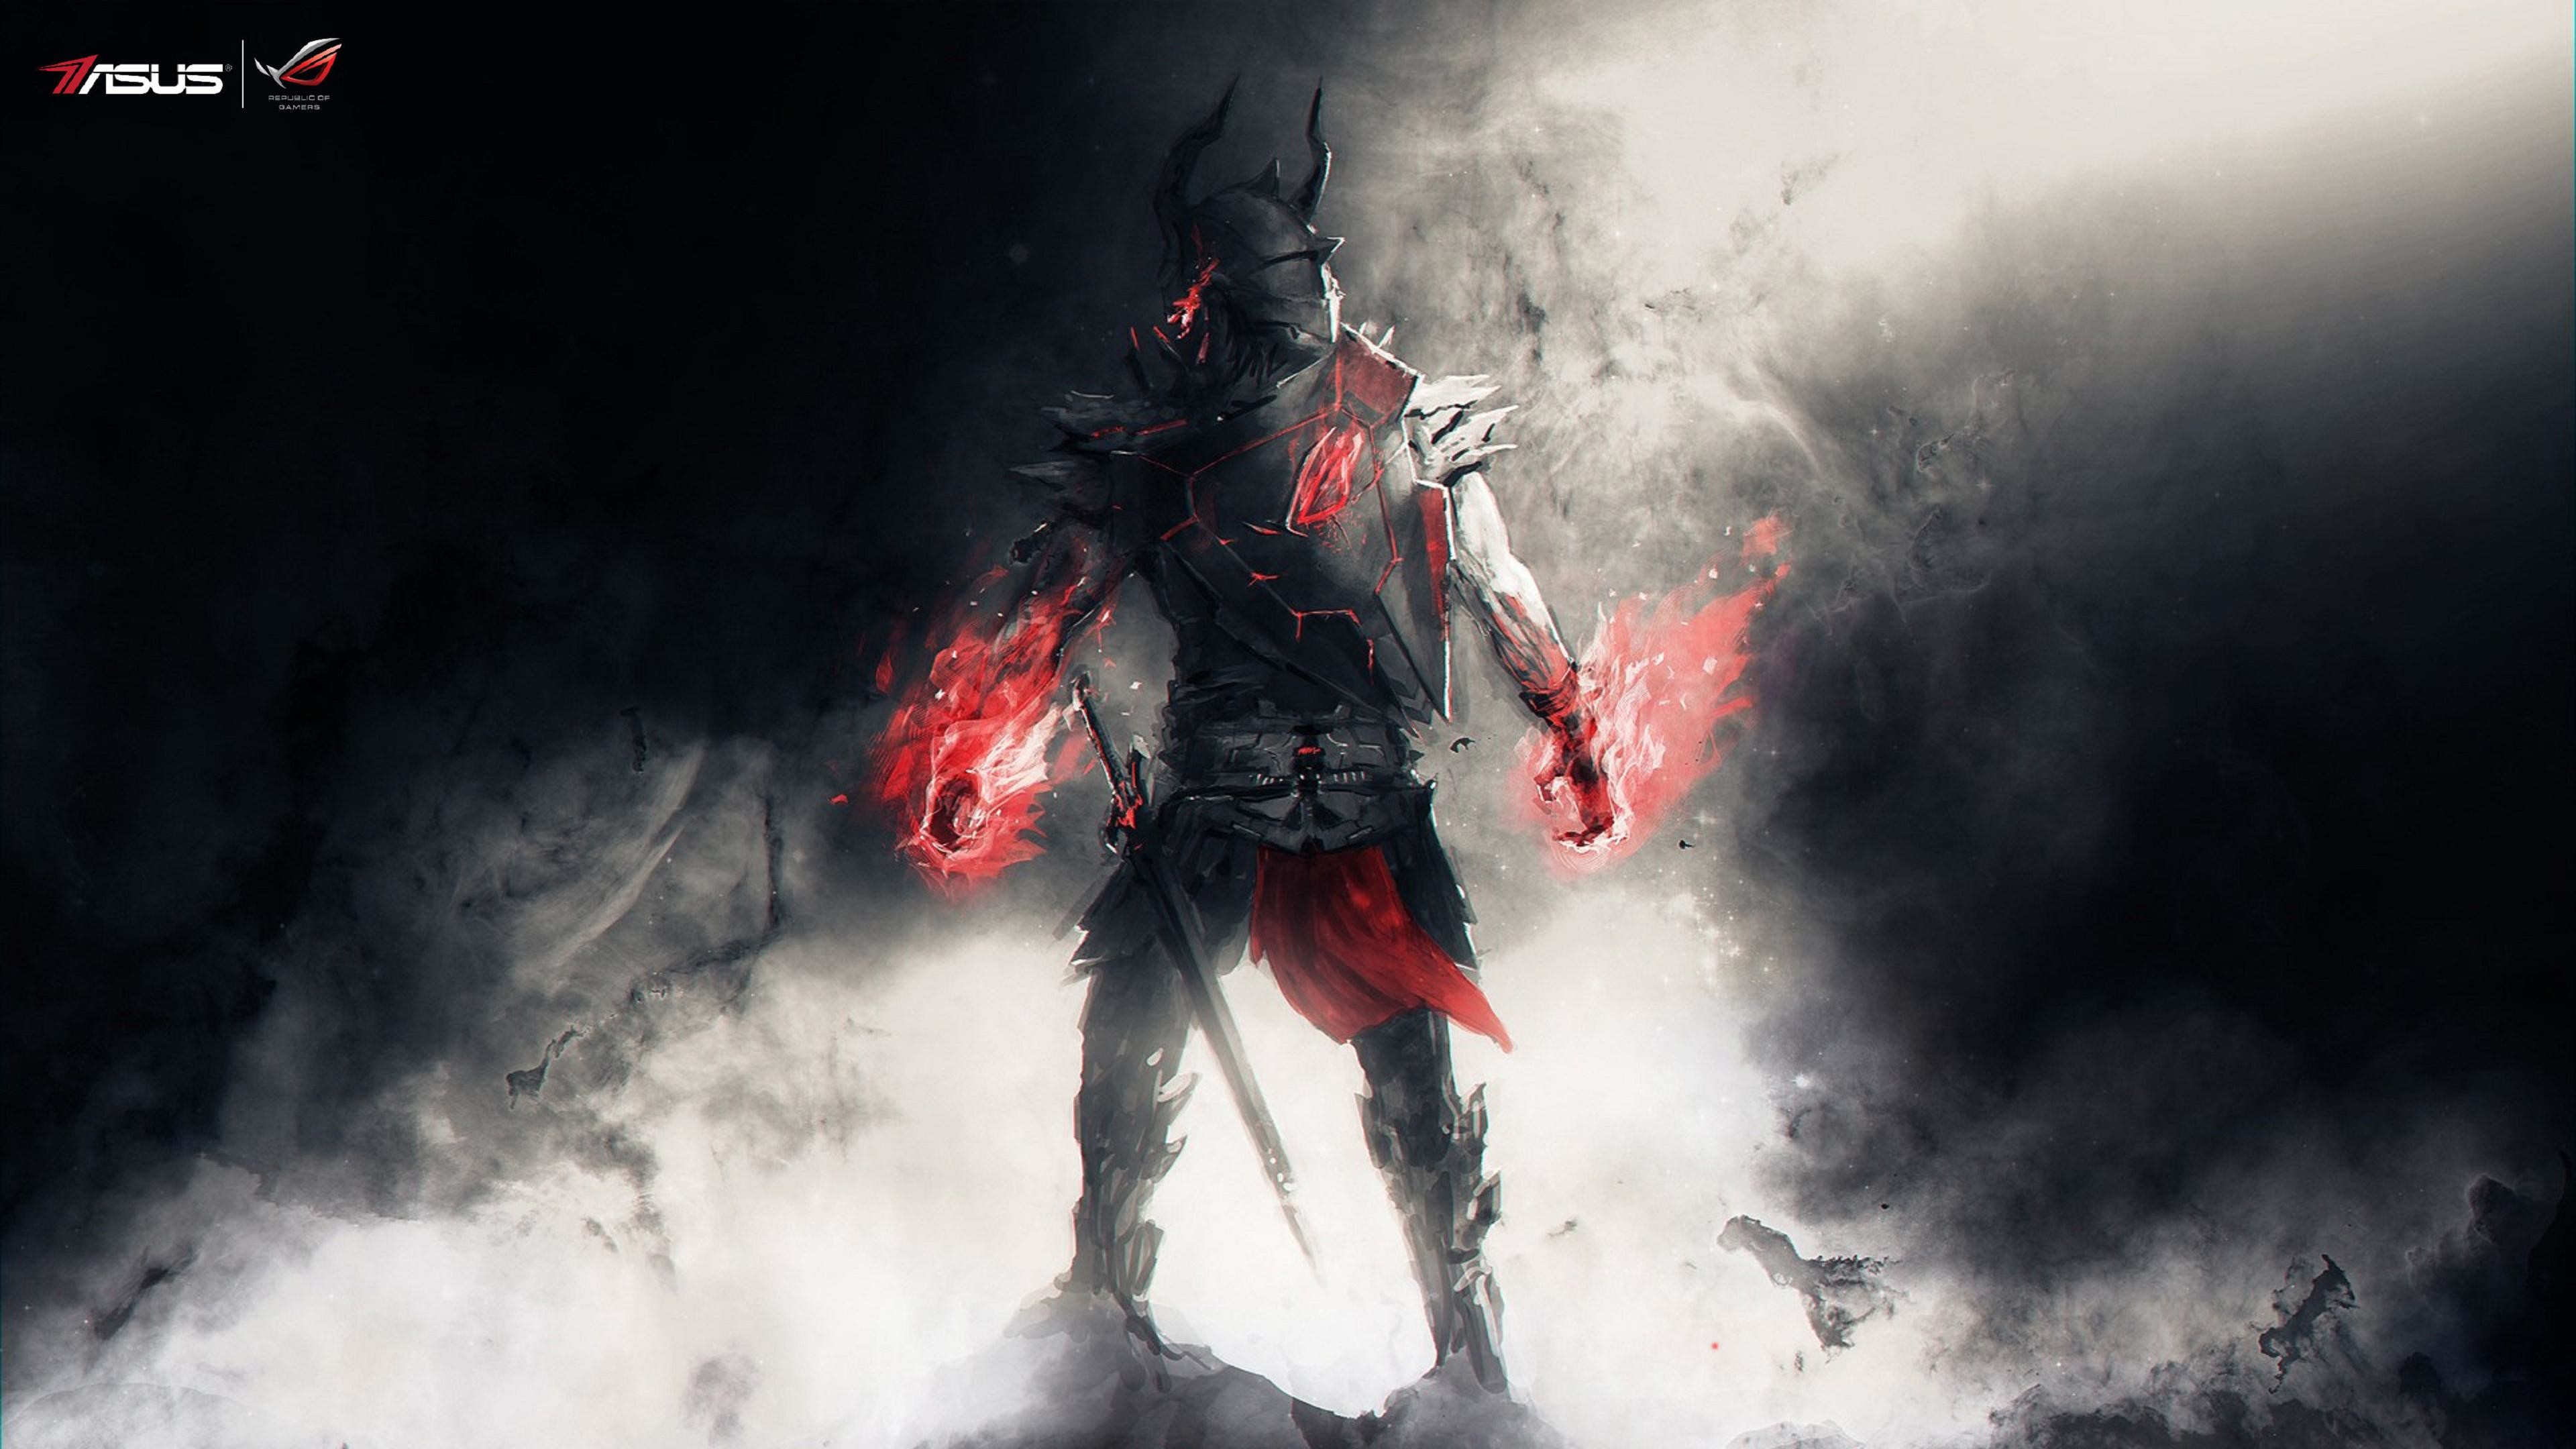 Best 20+ 4k gaming wallpaper ideas on Pinterest | The witcher 3 pc, Witcher  3 wild hunt and The witcher wild hunt